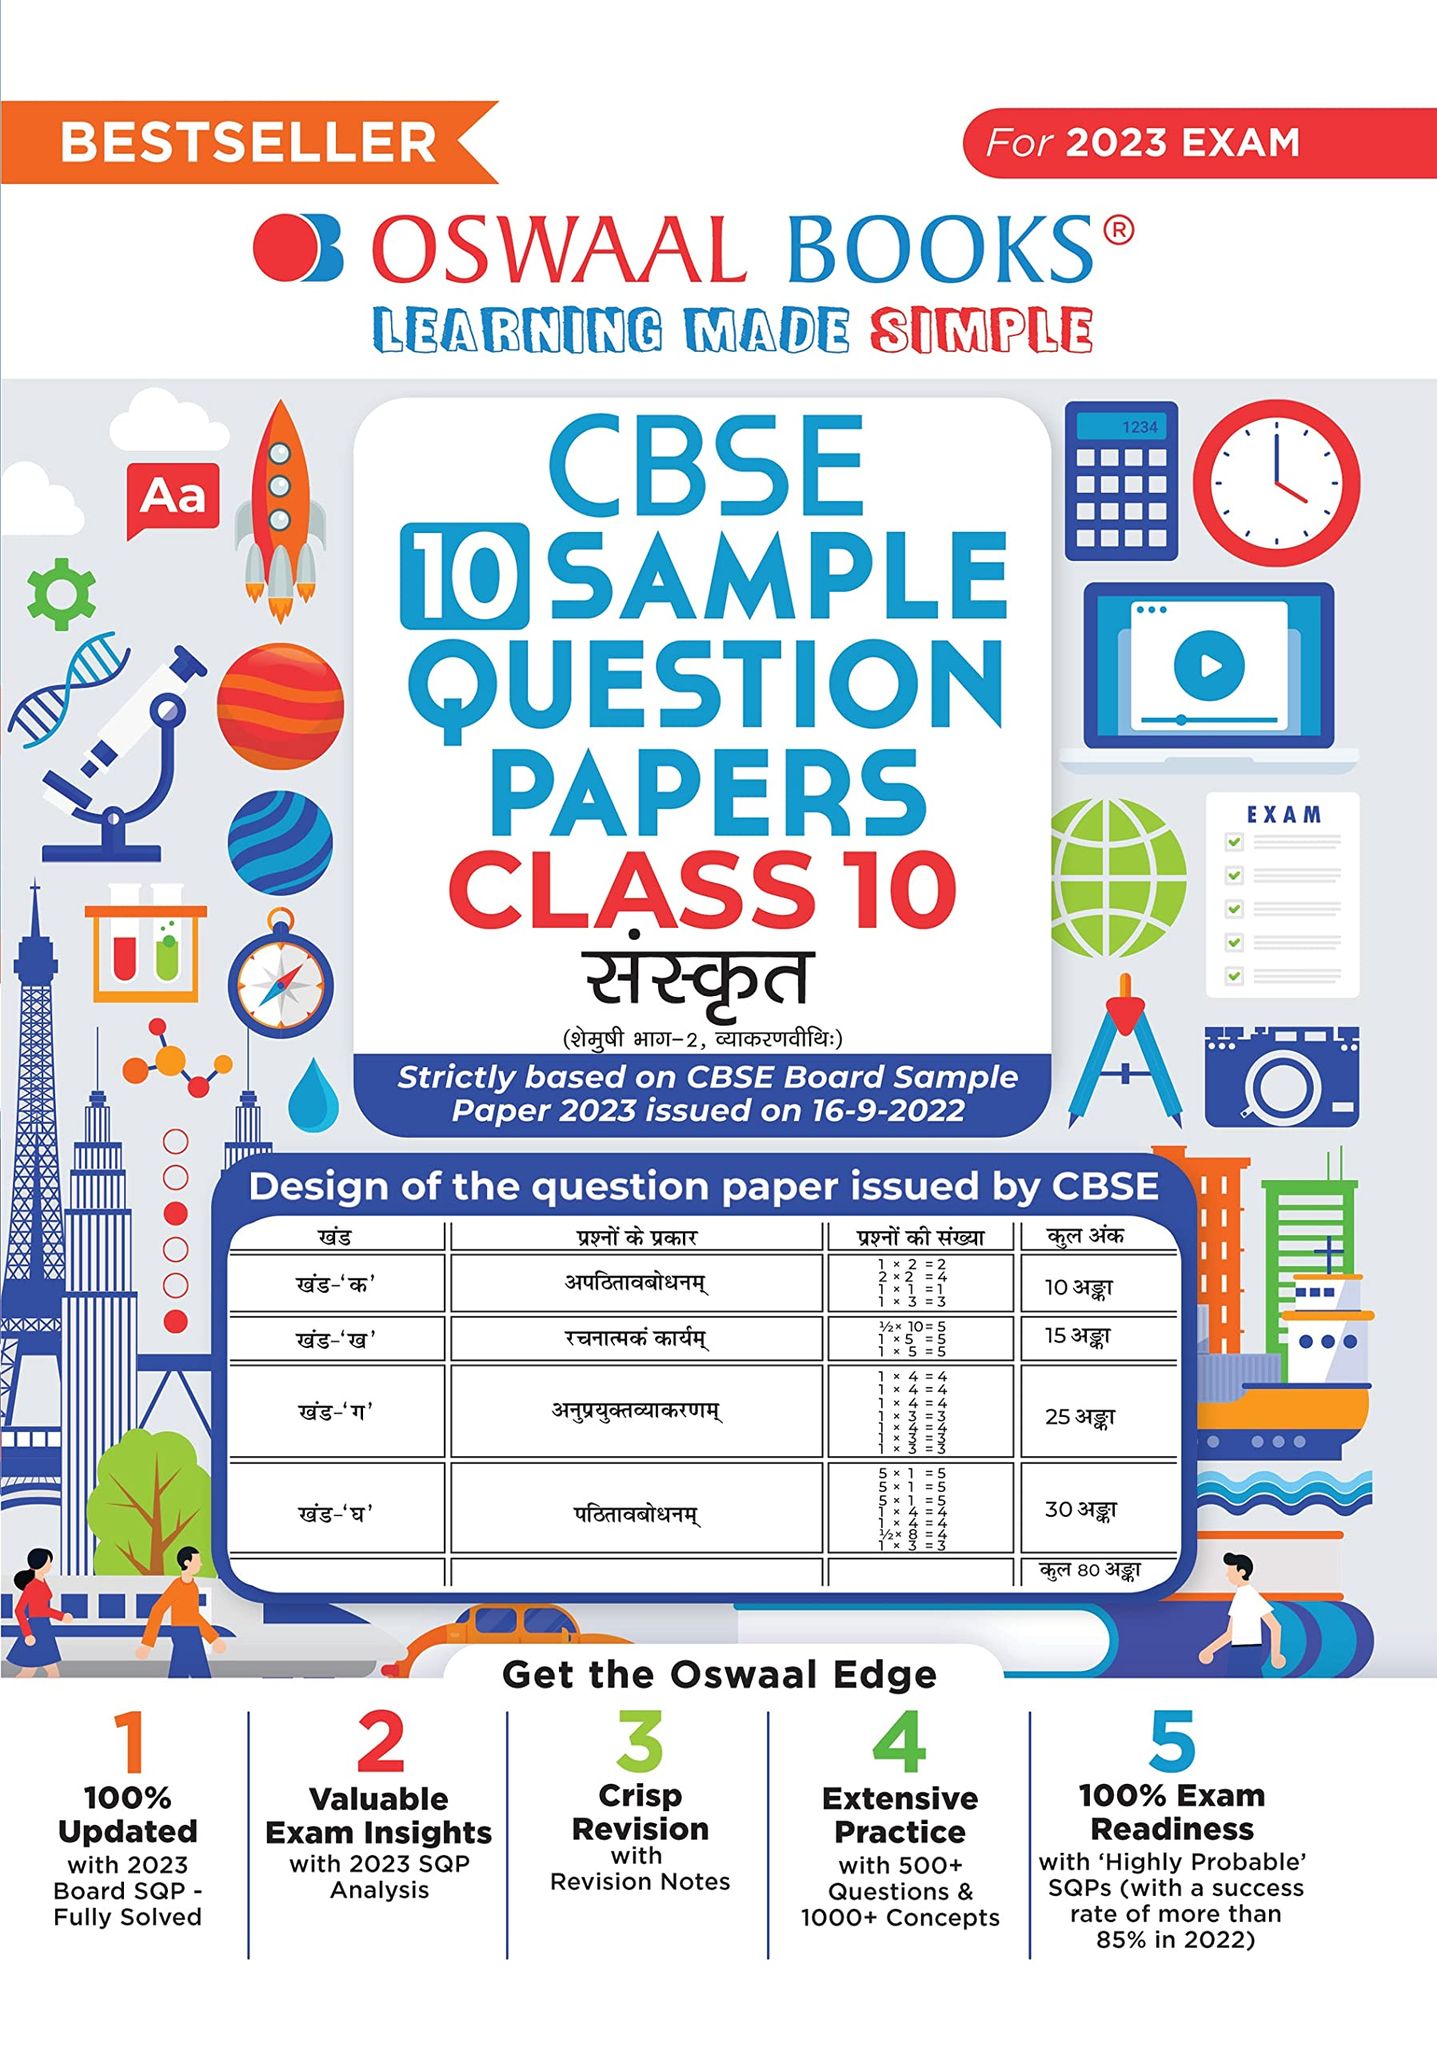 Oswaal CBSE Sample Question Papers Class 10 Sanskrit Hardcover Book for 2023 Board Exam (based on CBSE Sample Paper released on 16th September) [Hardcover] Oswaal Editorial Board